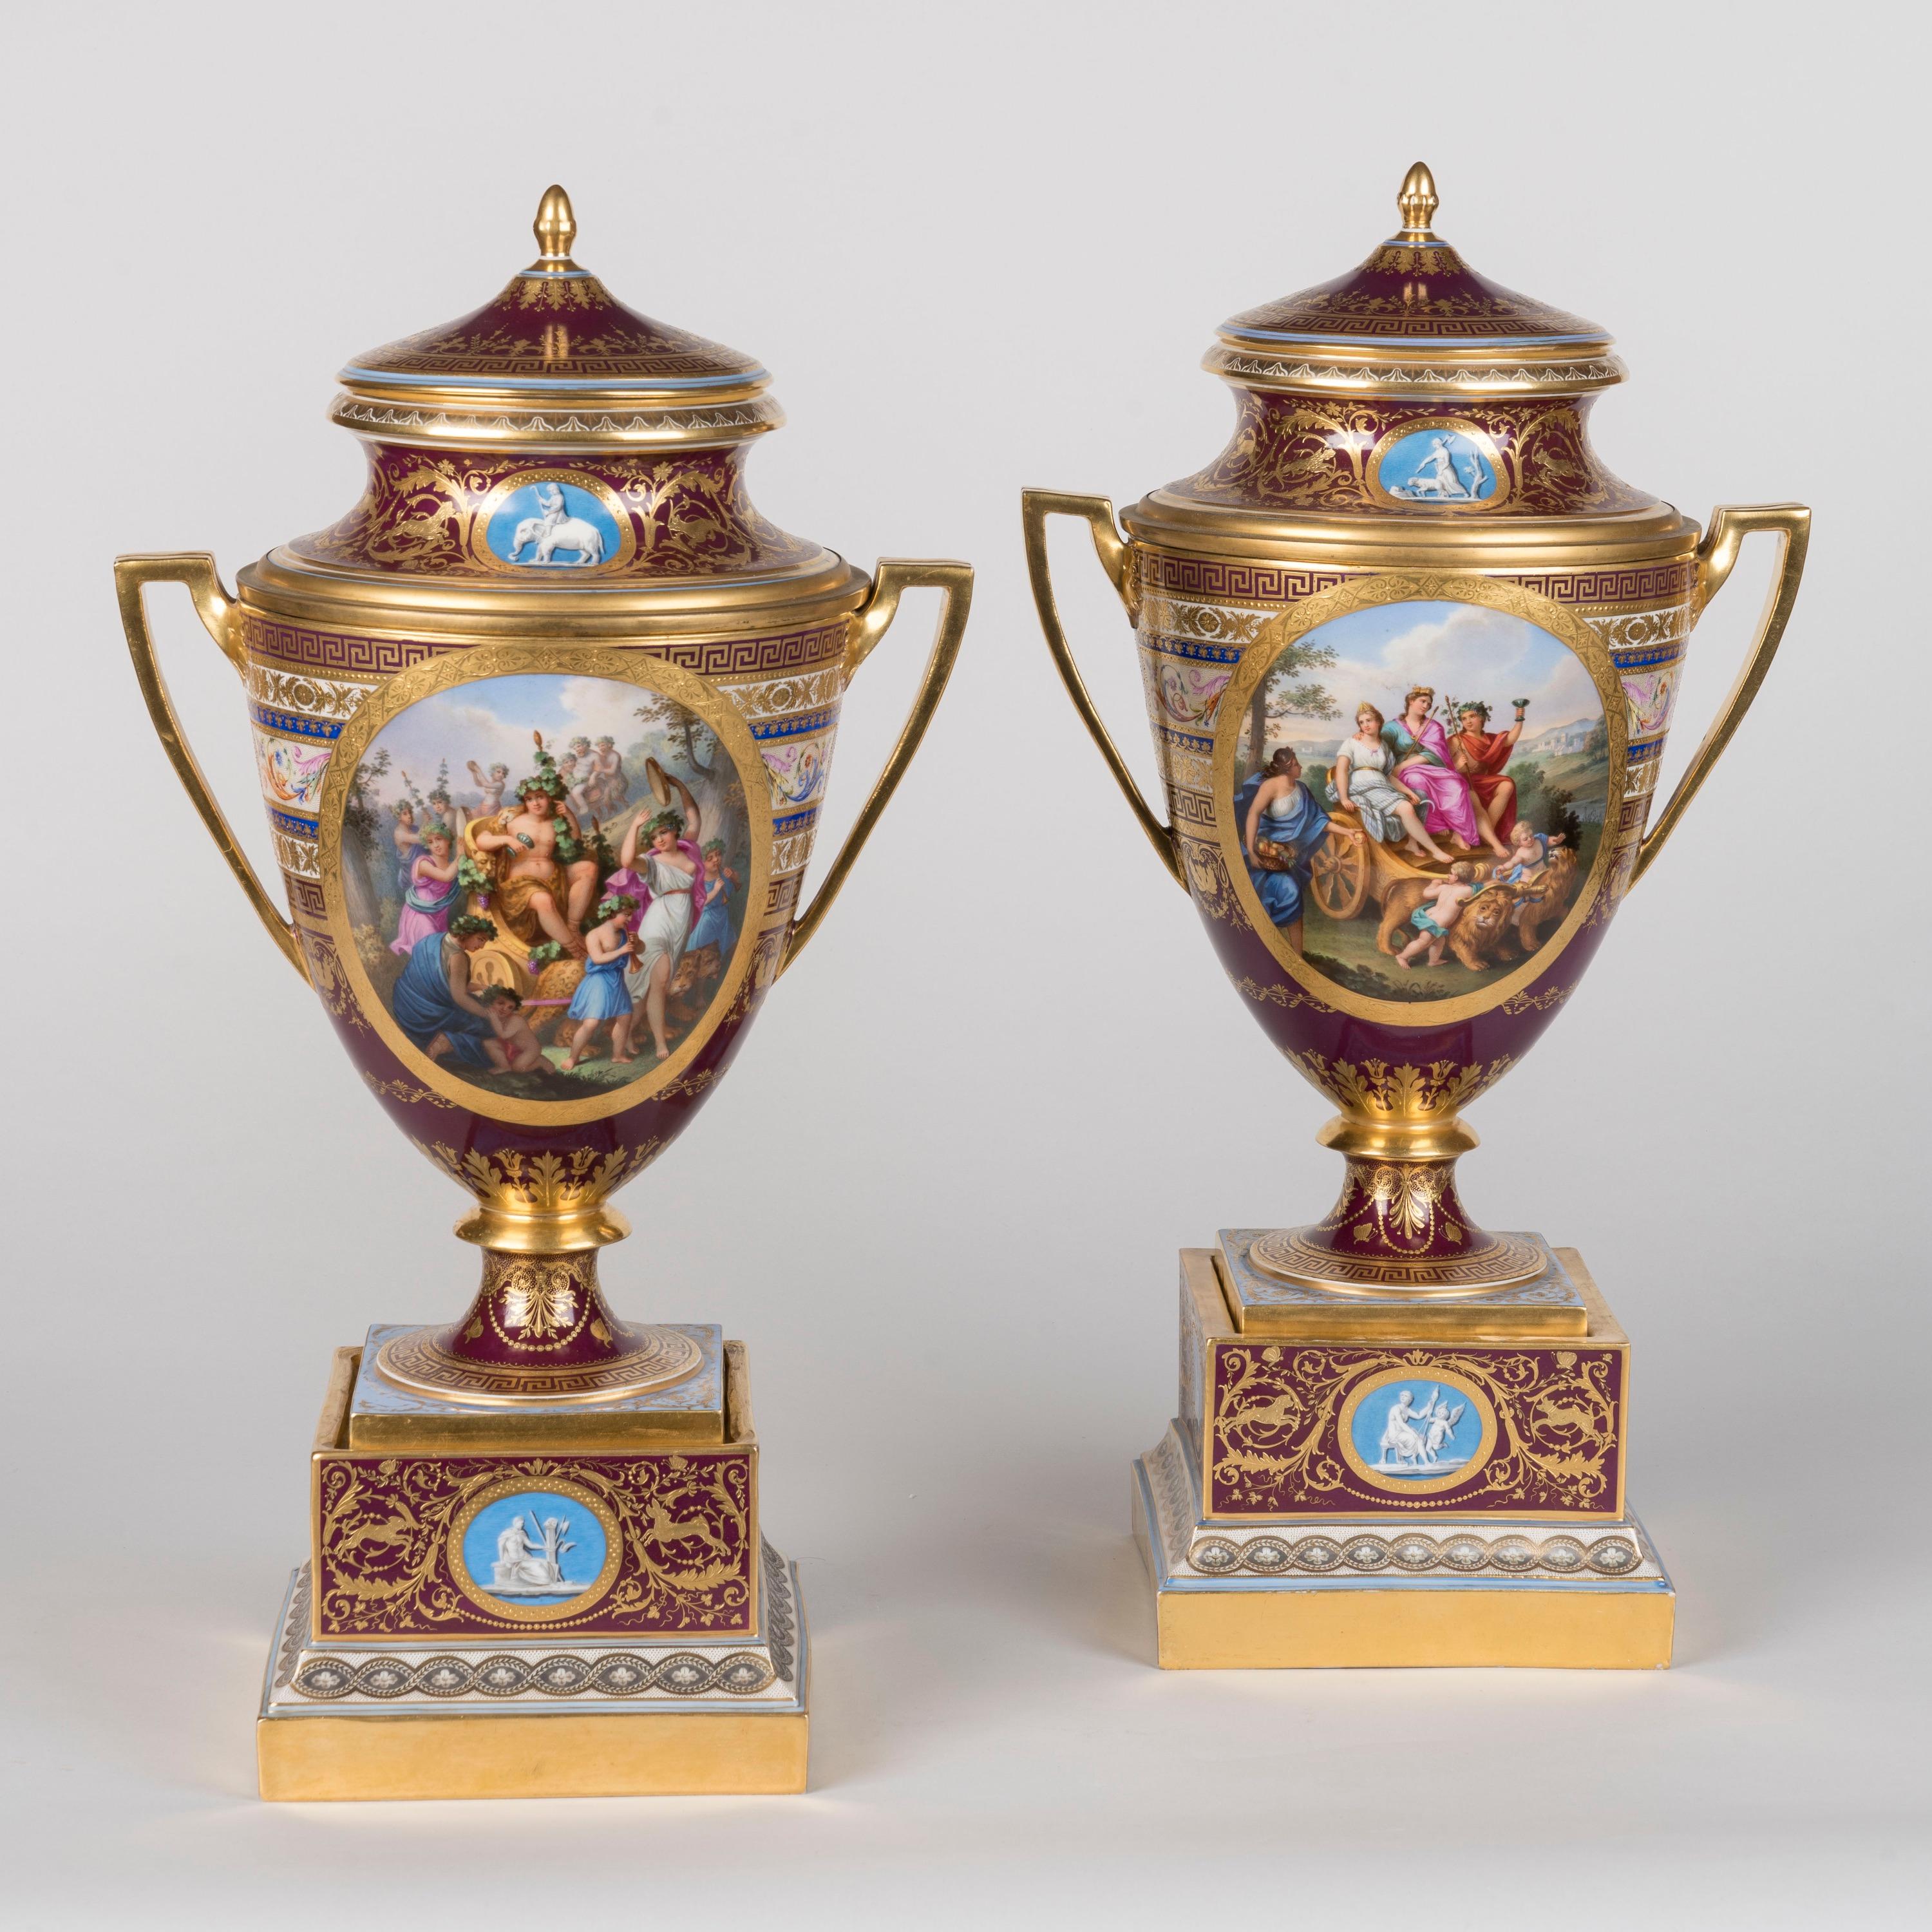 A rare and finely decorated pair of porcelain ice cream pails on stands, 

The decoration of the vases is outstanding: the four medallions representing neoclassical mythological scenes of Bacchus, Ceres, Ariadne and Europa surrounded by intricate